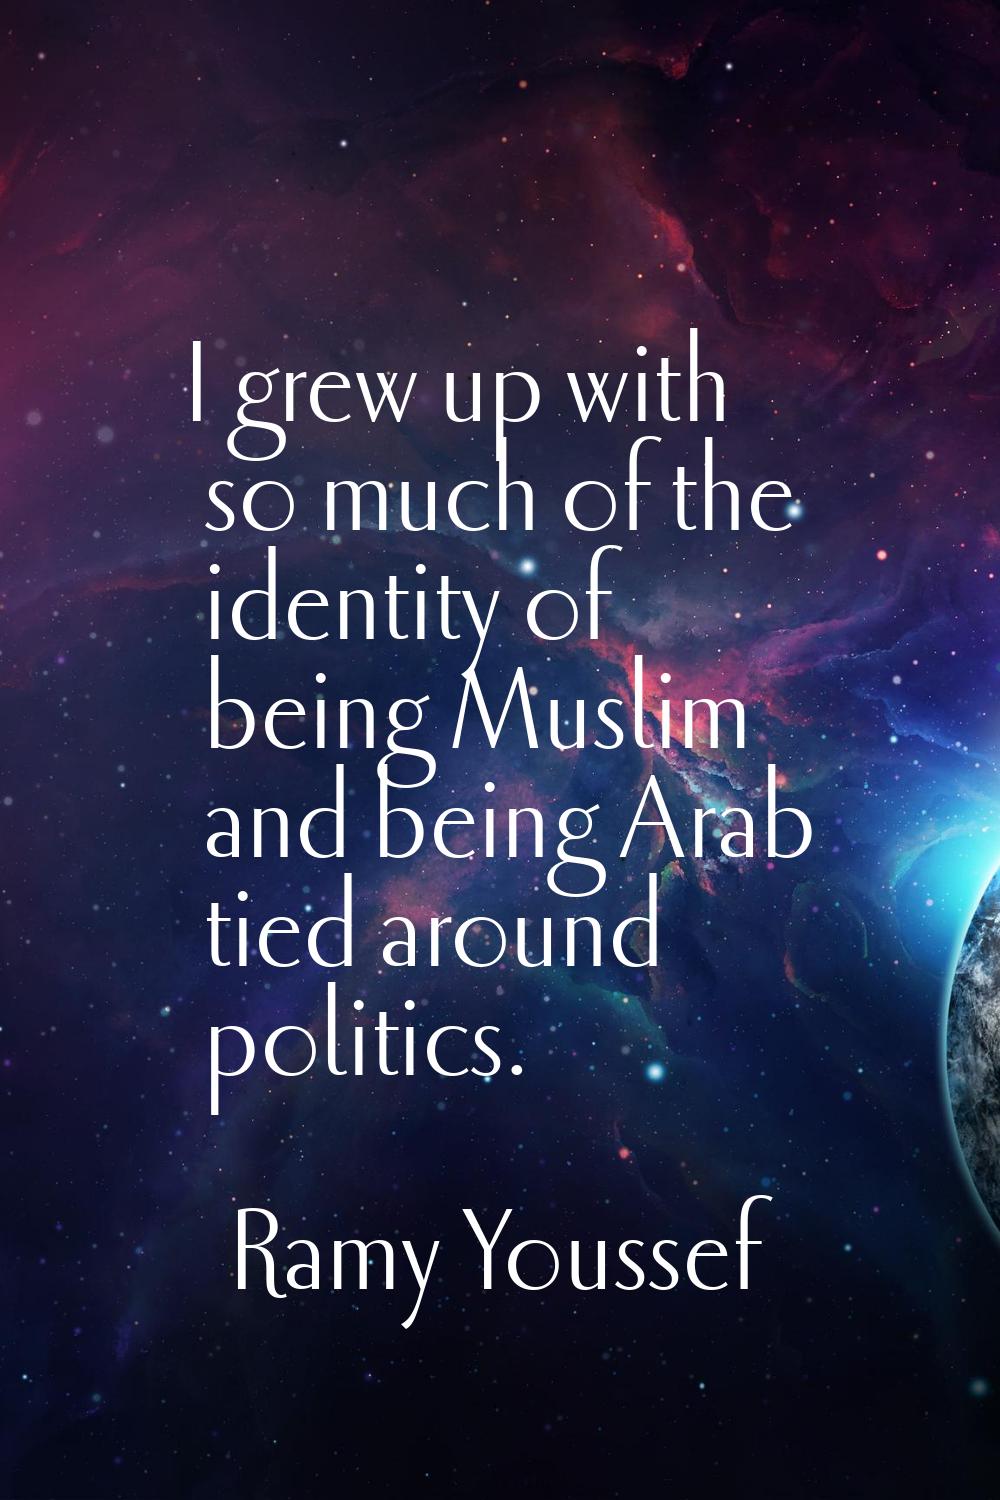 I grew up with so much of the identity of being Muslim and being Arab tied around politics.